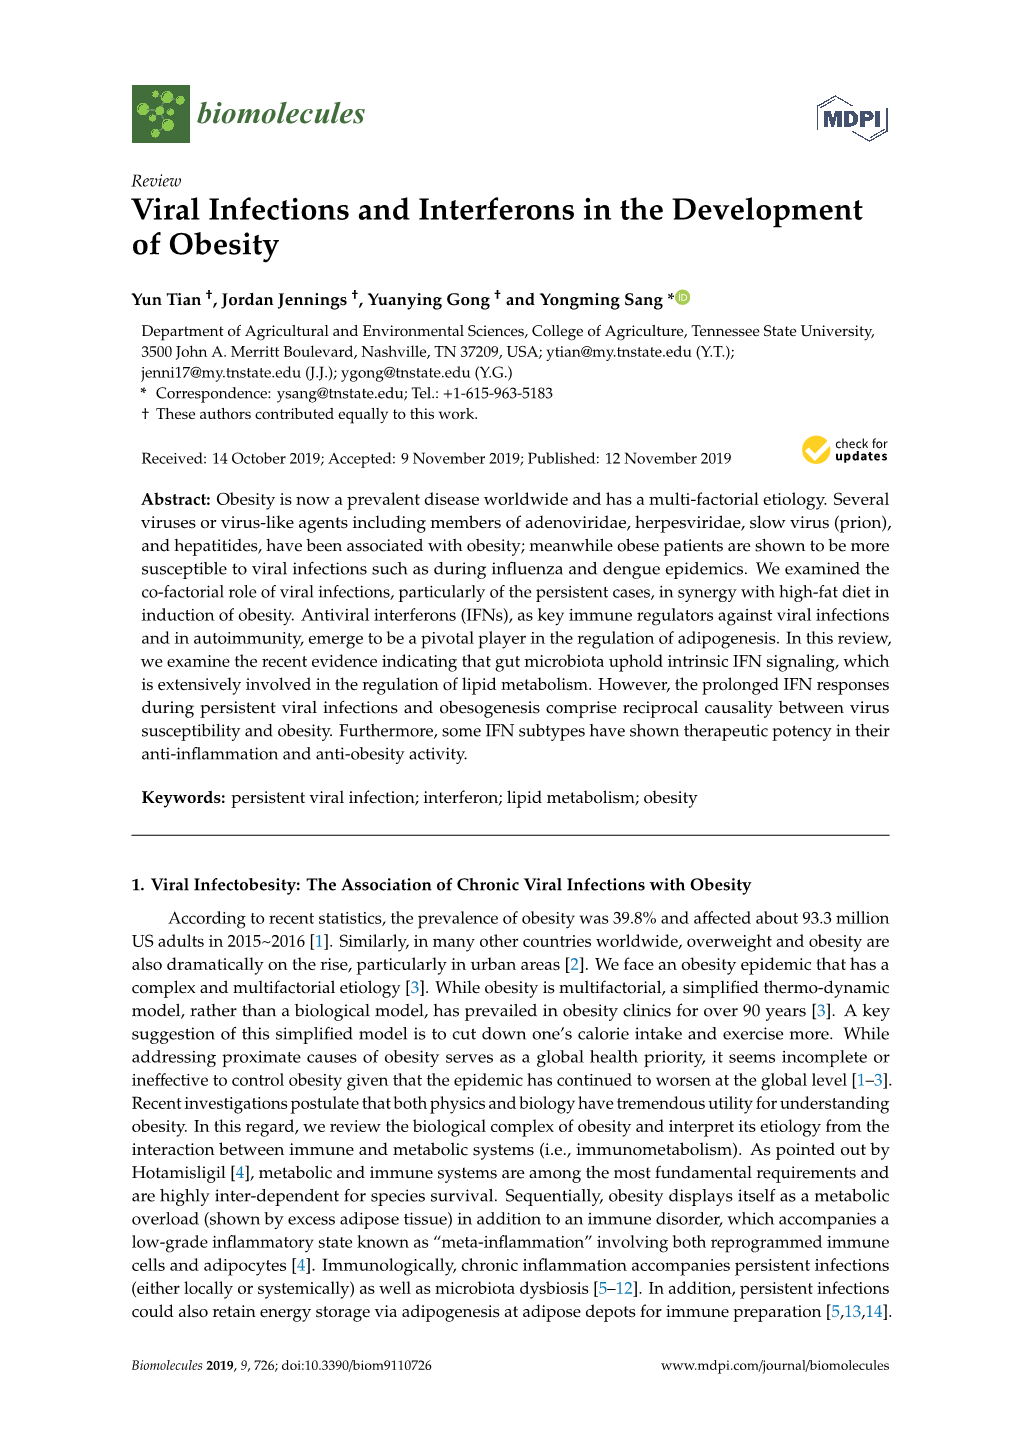 Viral Infections and Interferons in the Development of Obesity